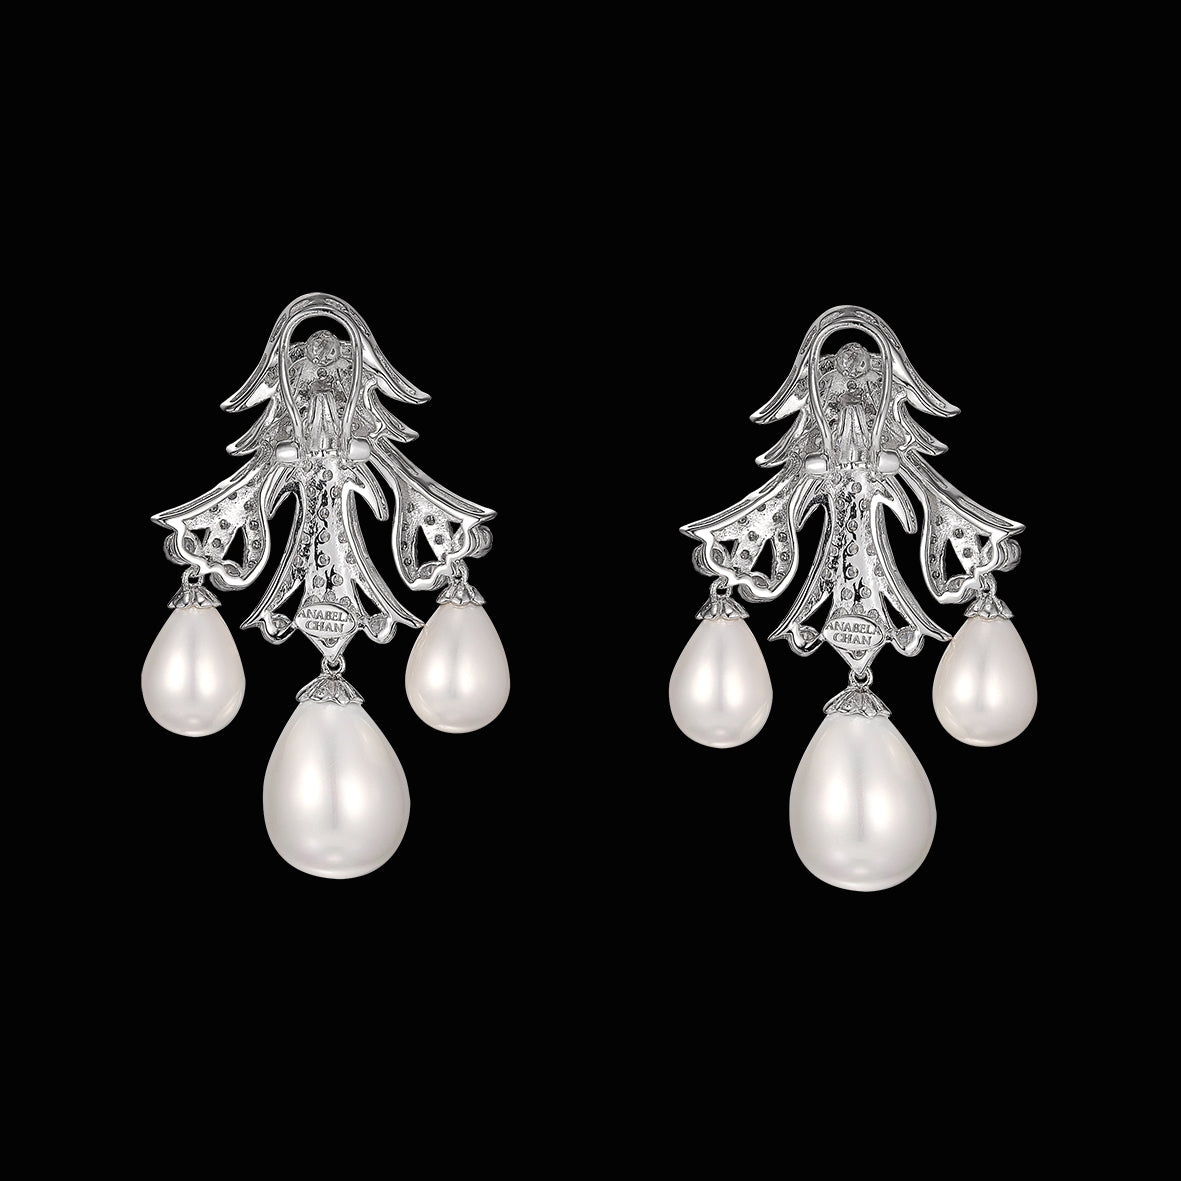 Pearl Phoenix Earrings, Earring, Anabela Chan Joaillerie - Fine jewelry with laboratory grown and created gemstones hand-crafted in the United Kingdom. Anabela Chan Joaillerie is the first fine jewellery brand in the world to champion laboratory-grown and created gemstones with high jewellery design, artisanal craftsmanship and a focus on ethical and sustainable innovations.